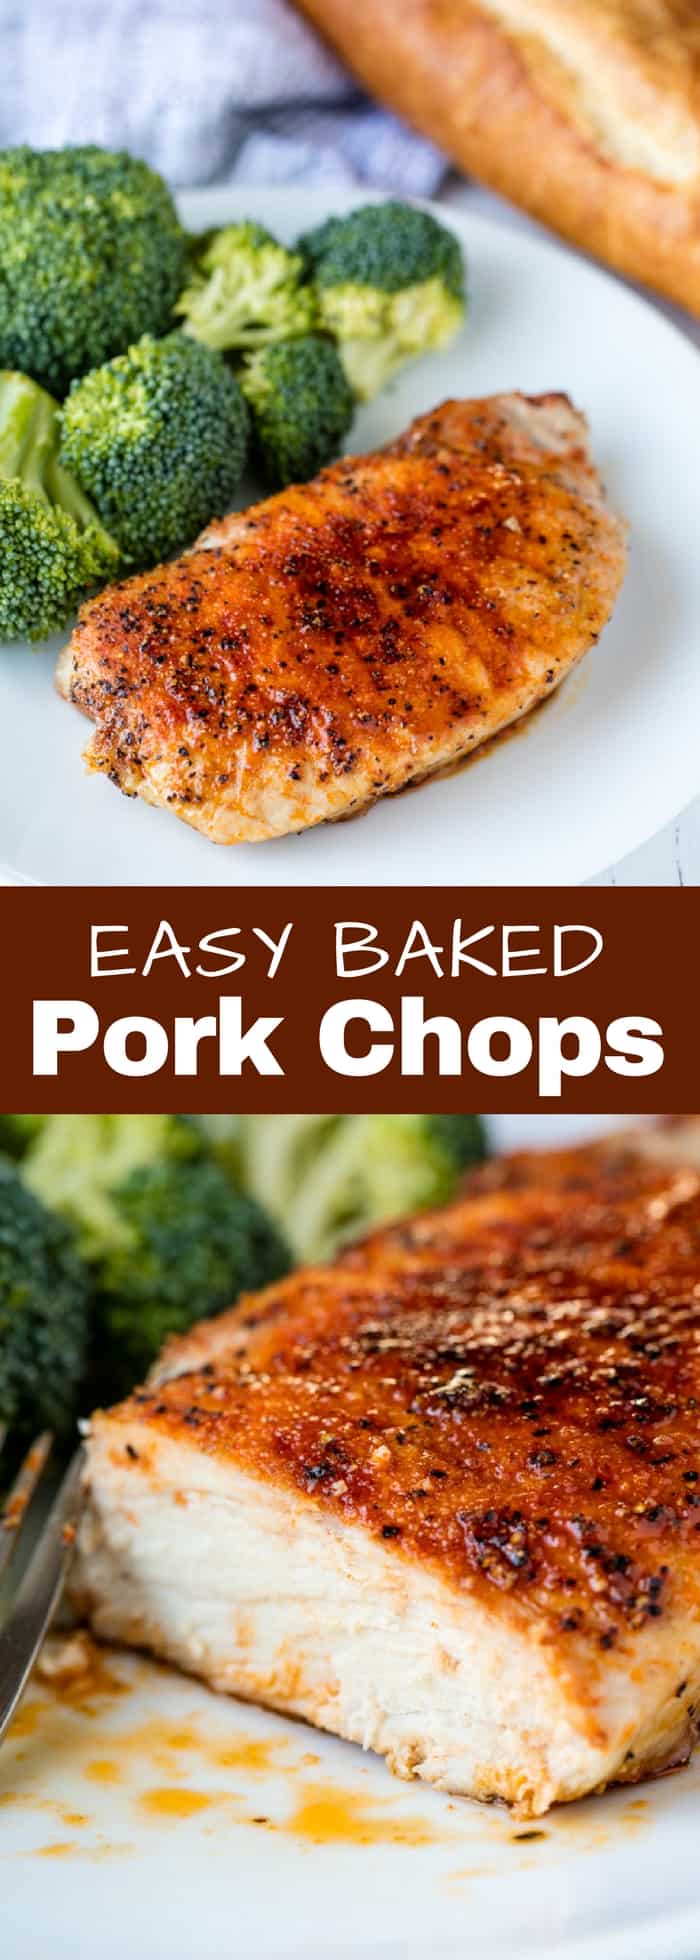 These Easy Baked Pork Chops only require a few spices to really make them stand out. They are juicy, tender, and full of flavor. 